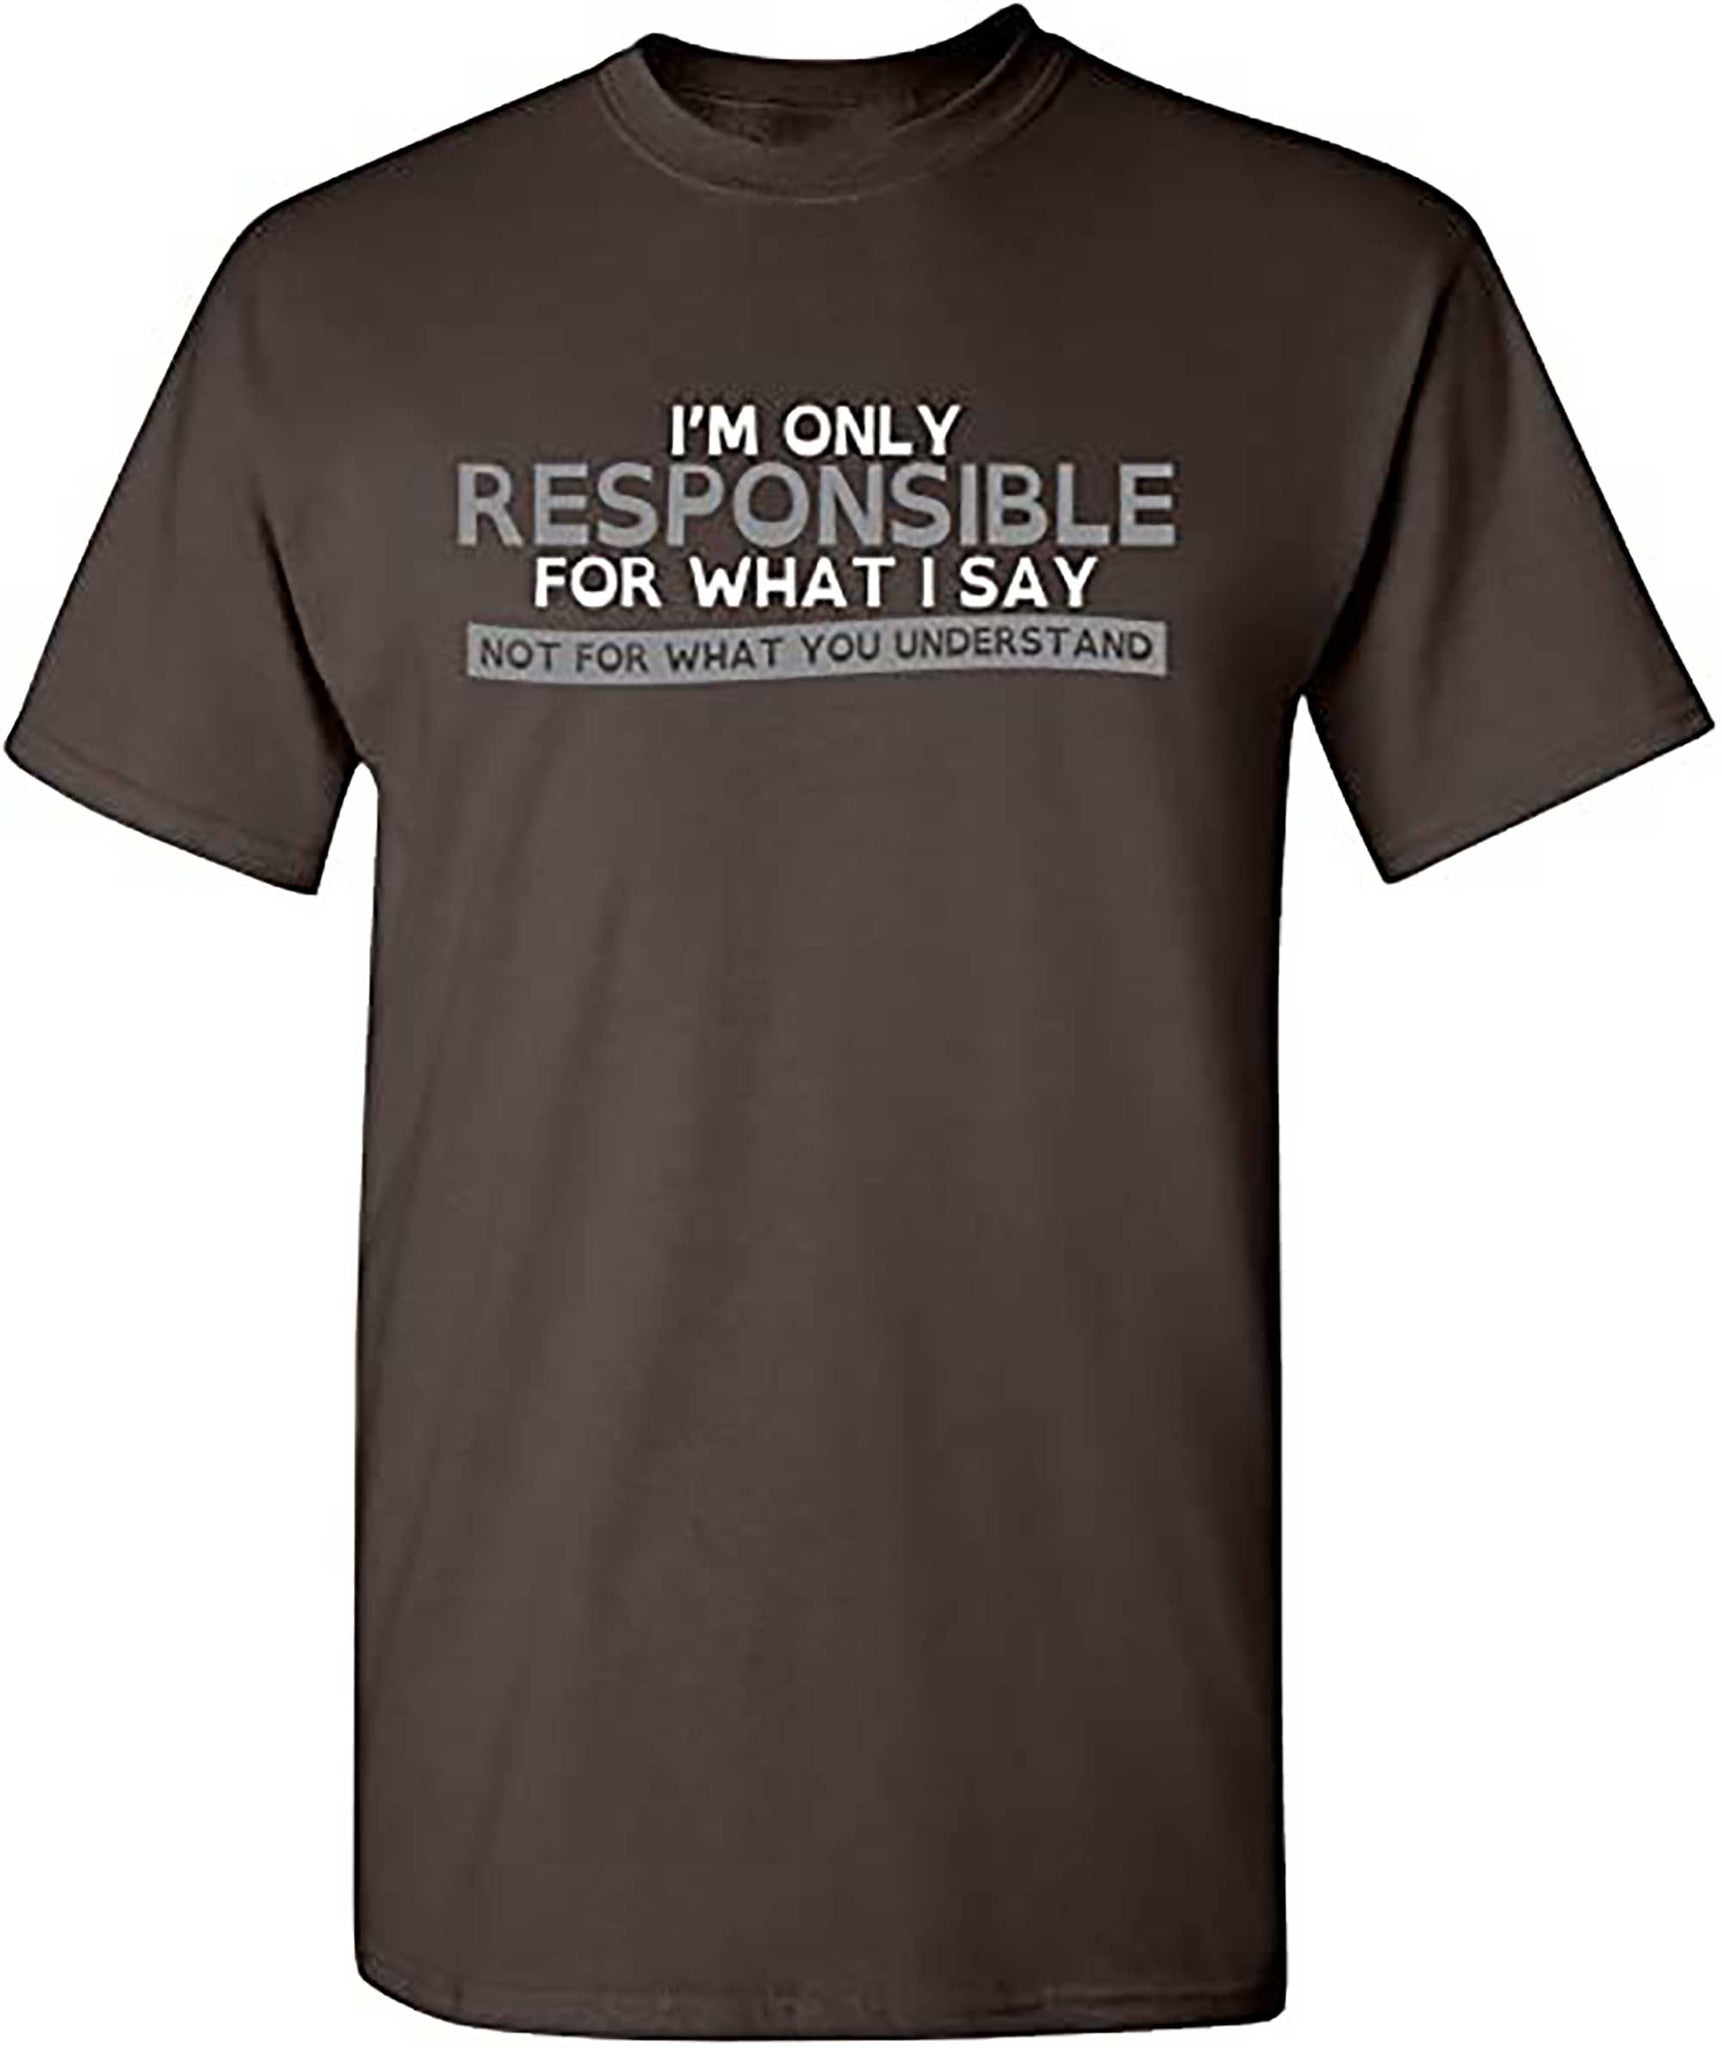 Skitongifts Only Responsible For What I Say Graphic Novelty Sarcastic Funny T Shirt